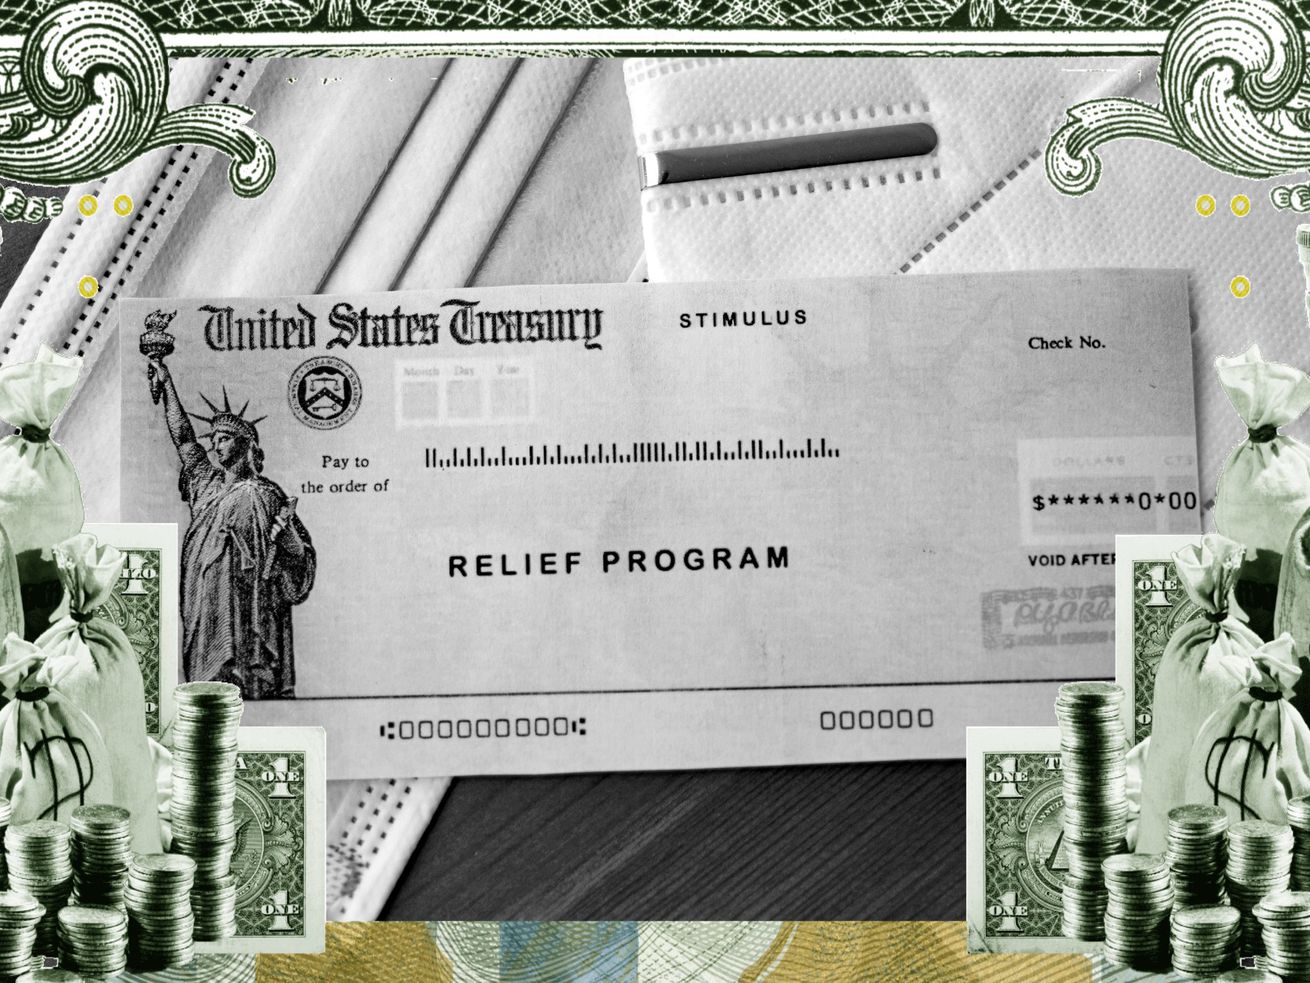 Money Talks: The mother and the college student who shared stimulus checks